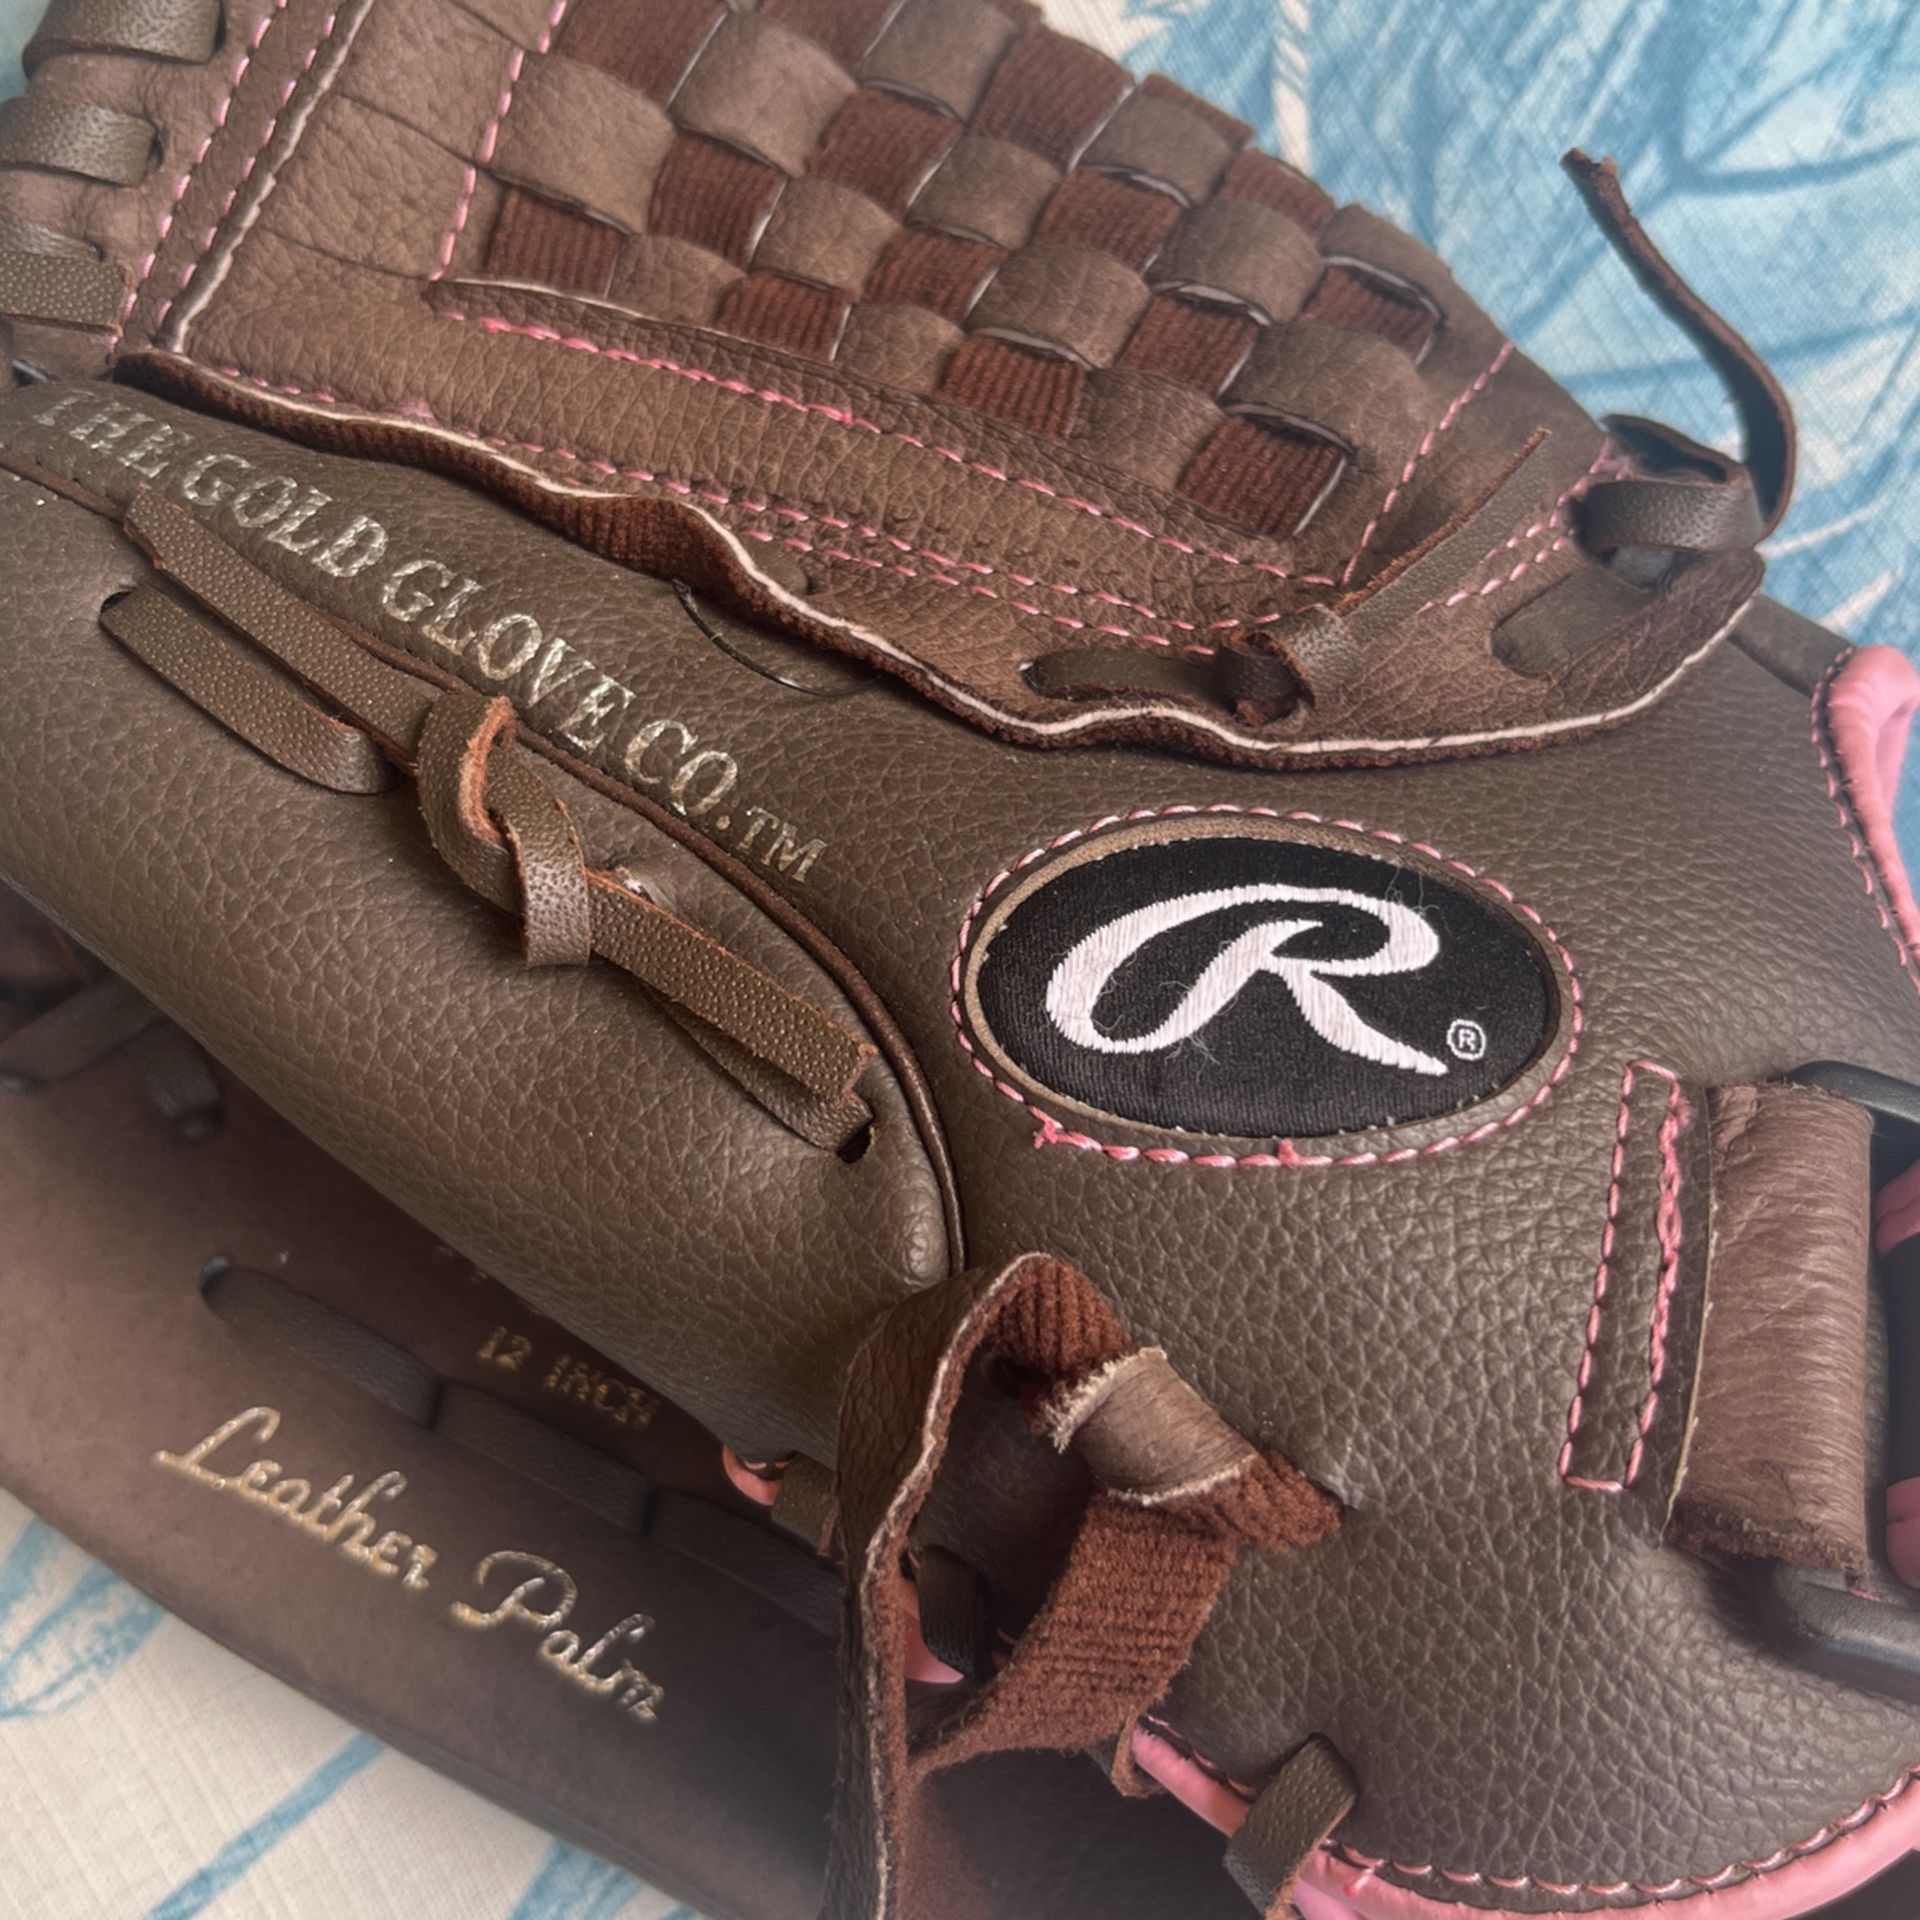 Rawlings Glove For A Girl